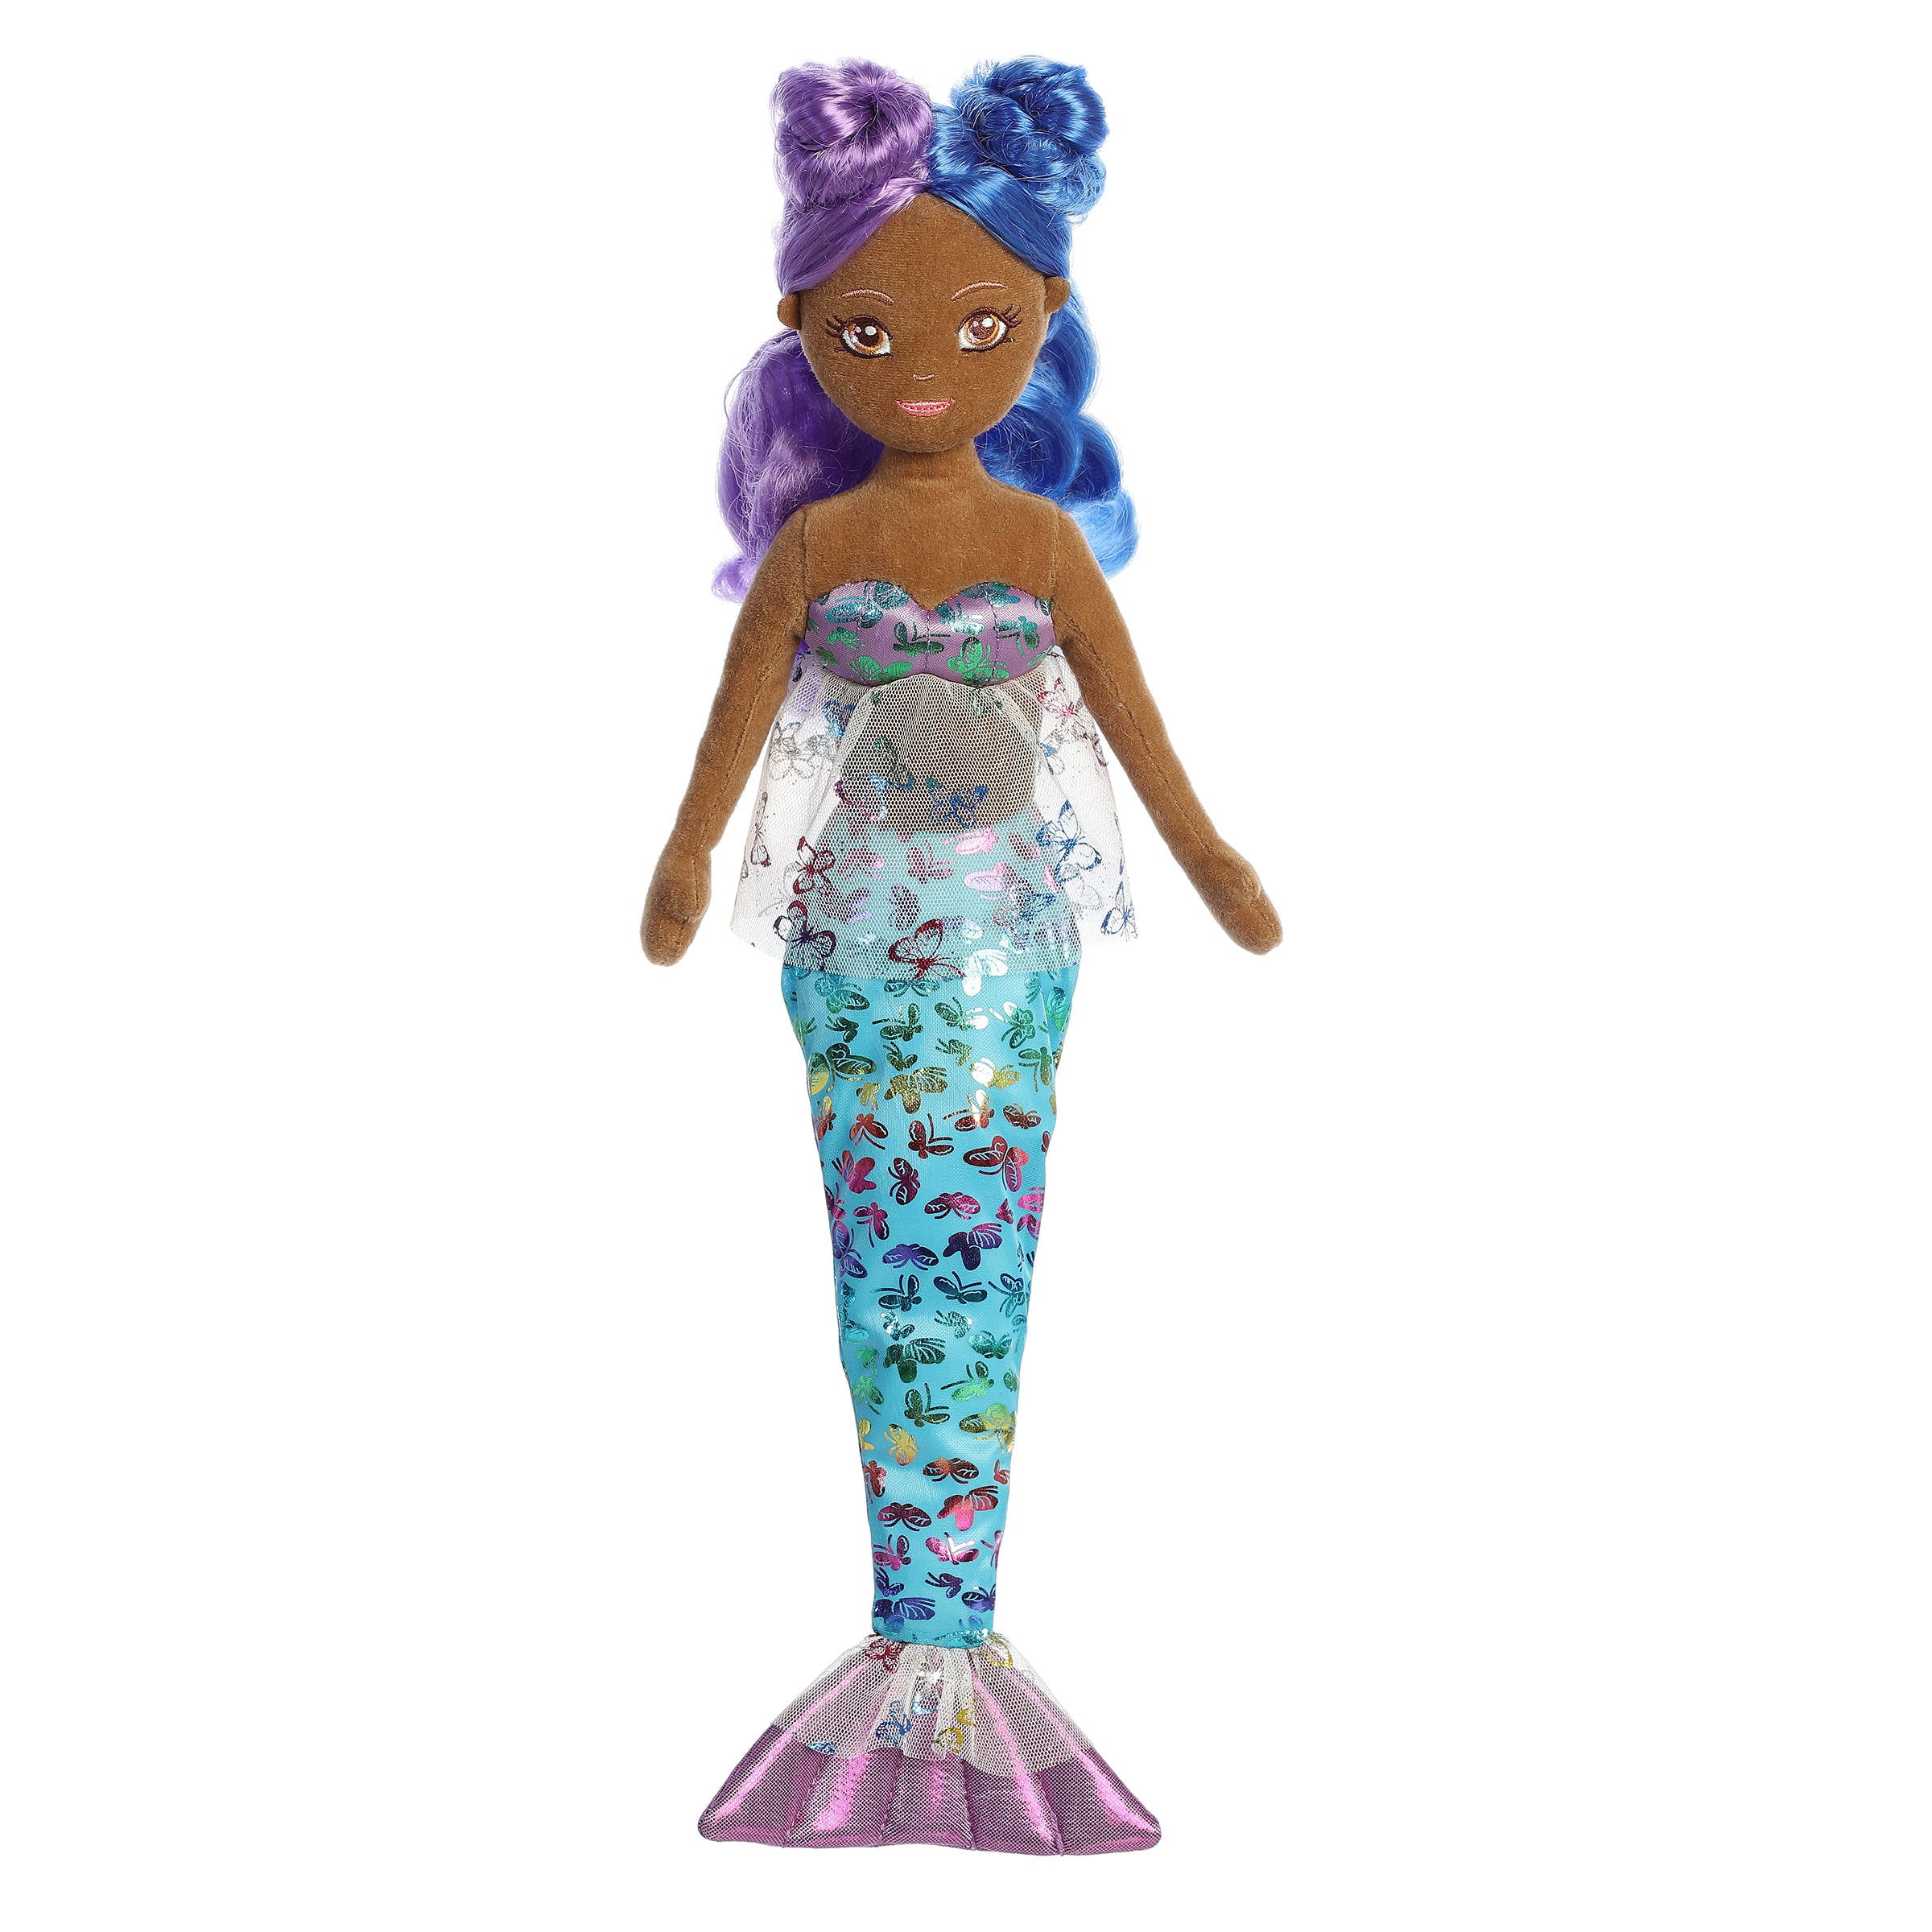 Mermaid plush doll, glowing with a blue and purple tail, showcasing the enchantment of the Sea Sparkles collection.